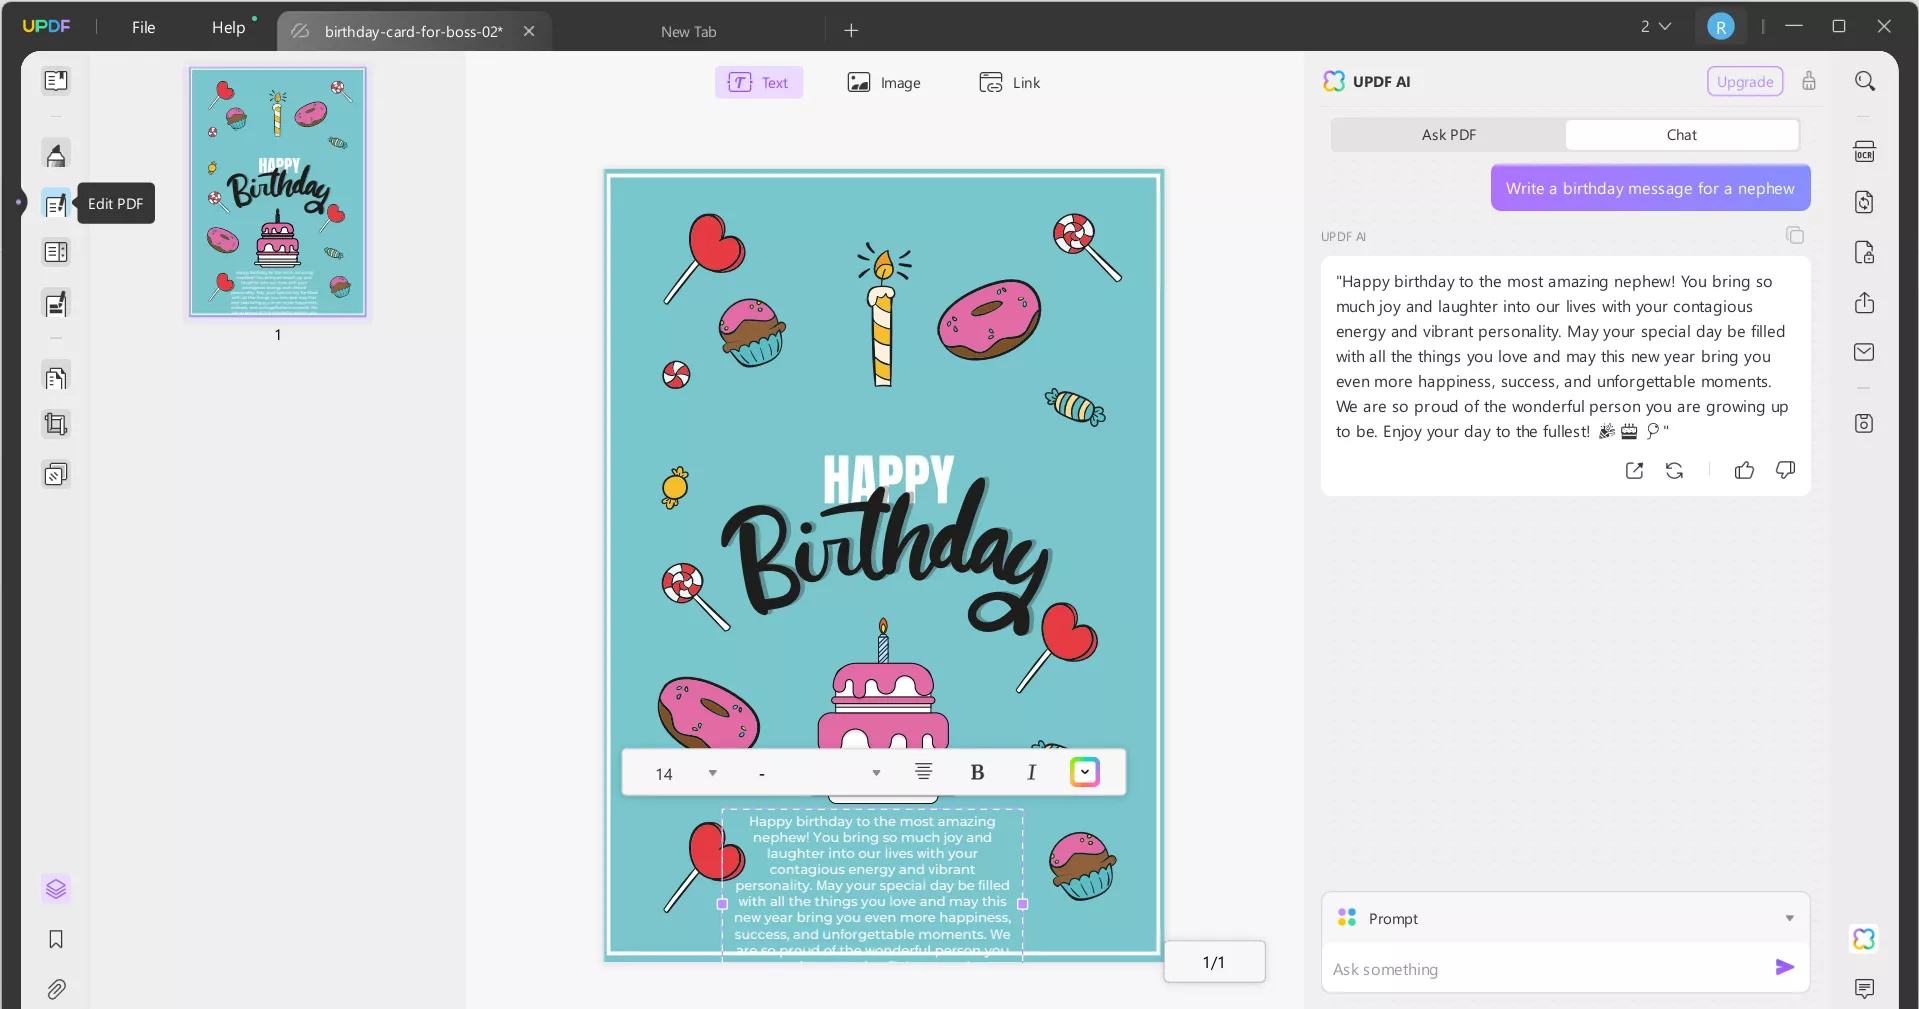 edit the birthday wish card template with UPDF